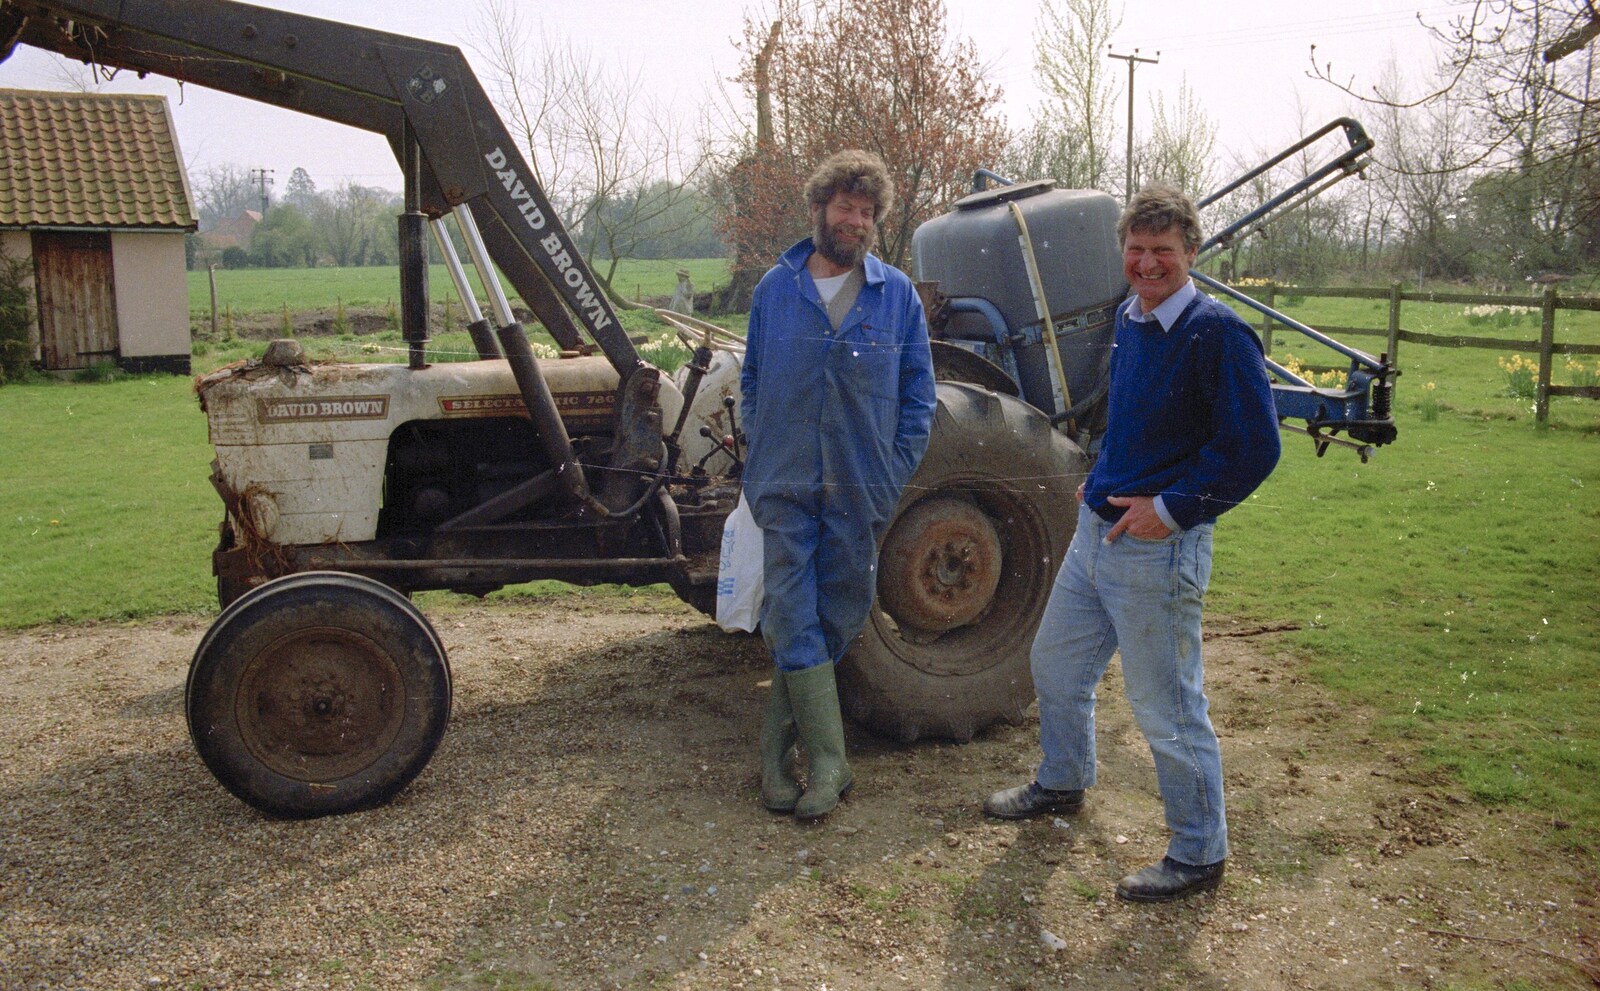 Mike Ogilsby, Geoff and a David Brown tractor from The Election Caravan and a View from a Cherry Picker, Stuston, Suffolk - 9th April 1992